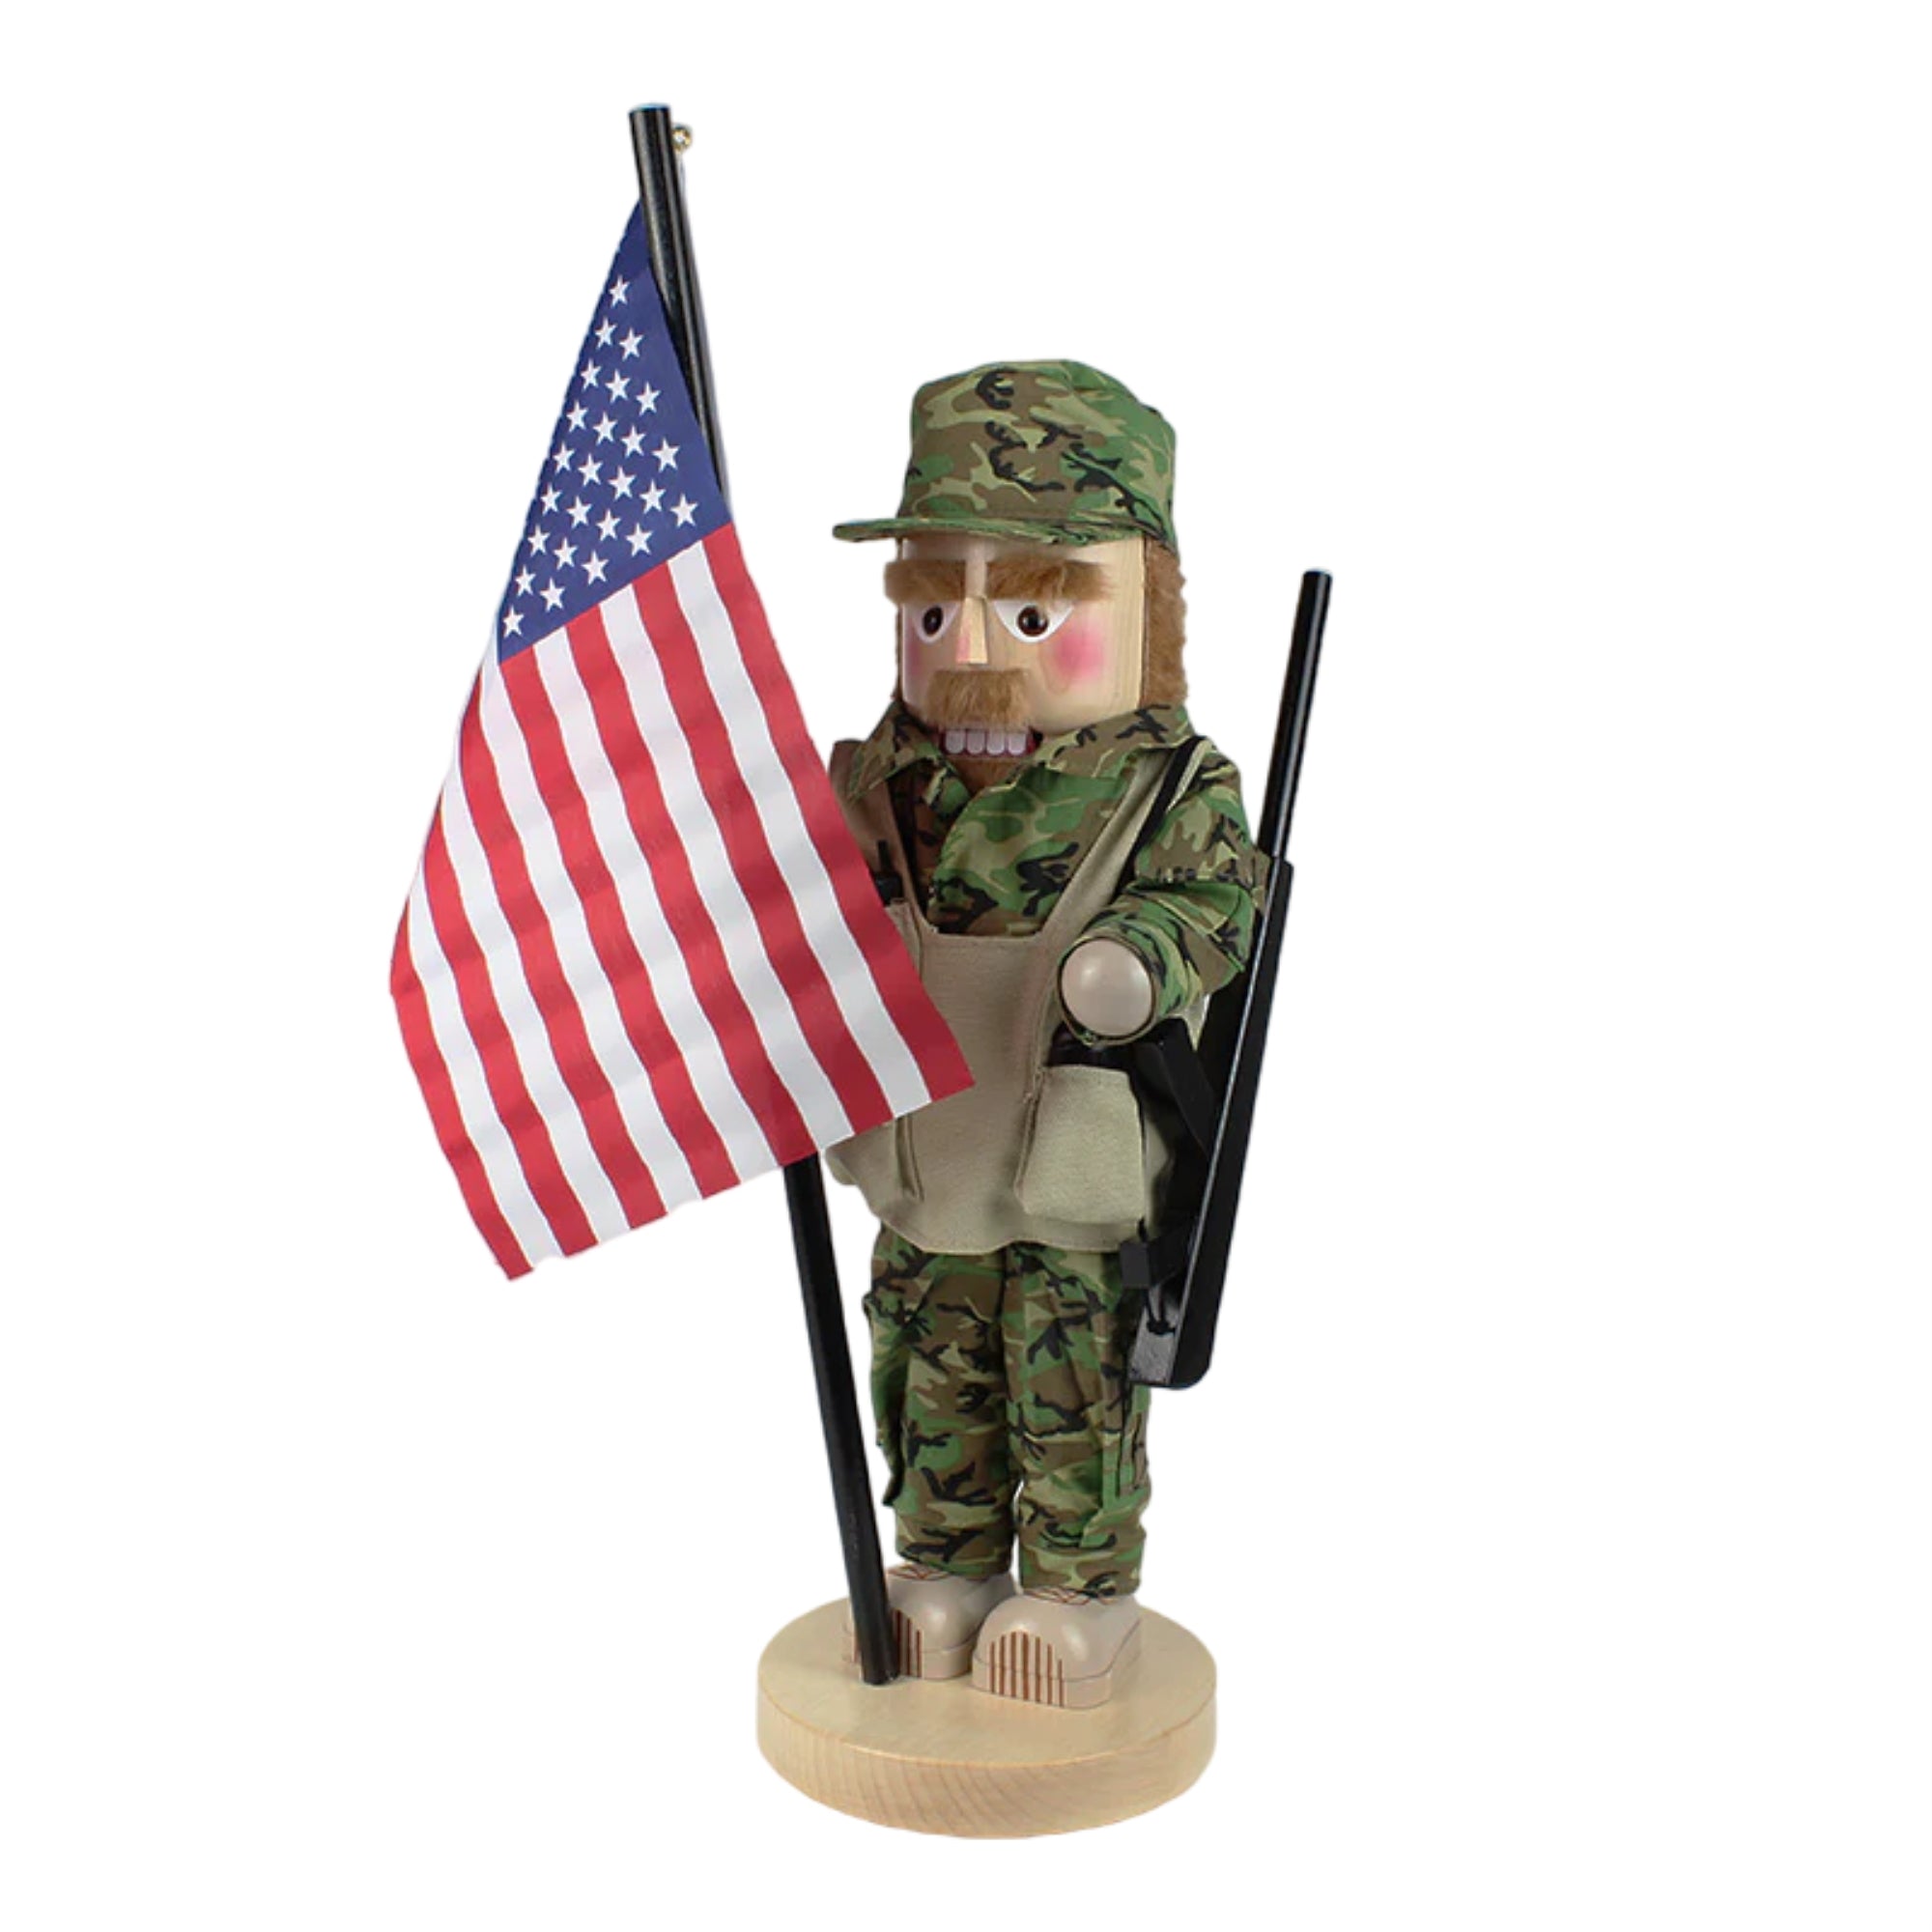 Steinbach Wooden Big Nutcracker For Christmas Decoration From Germany, U.S. Army Soldier, 17.25"